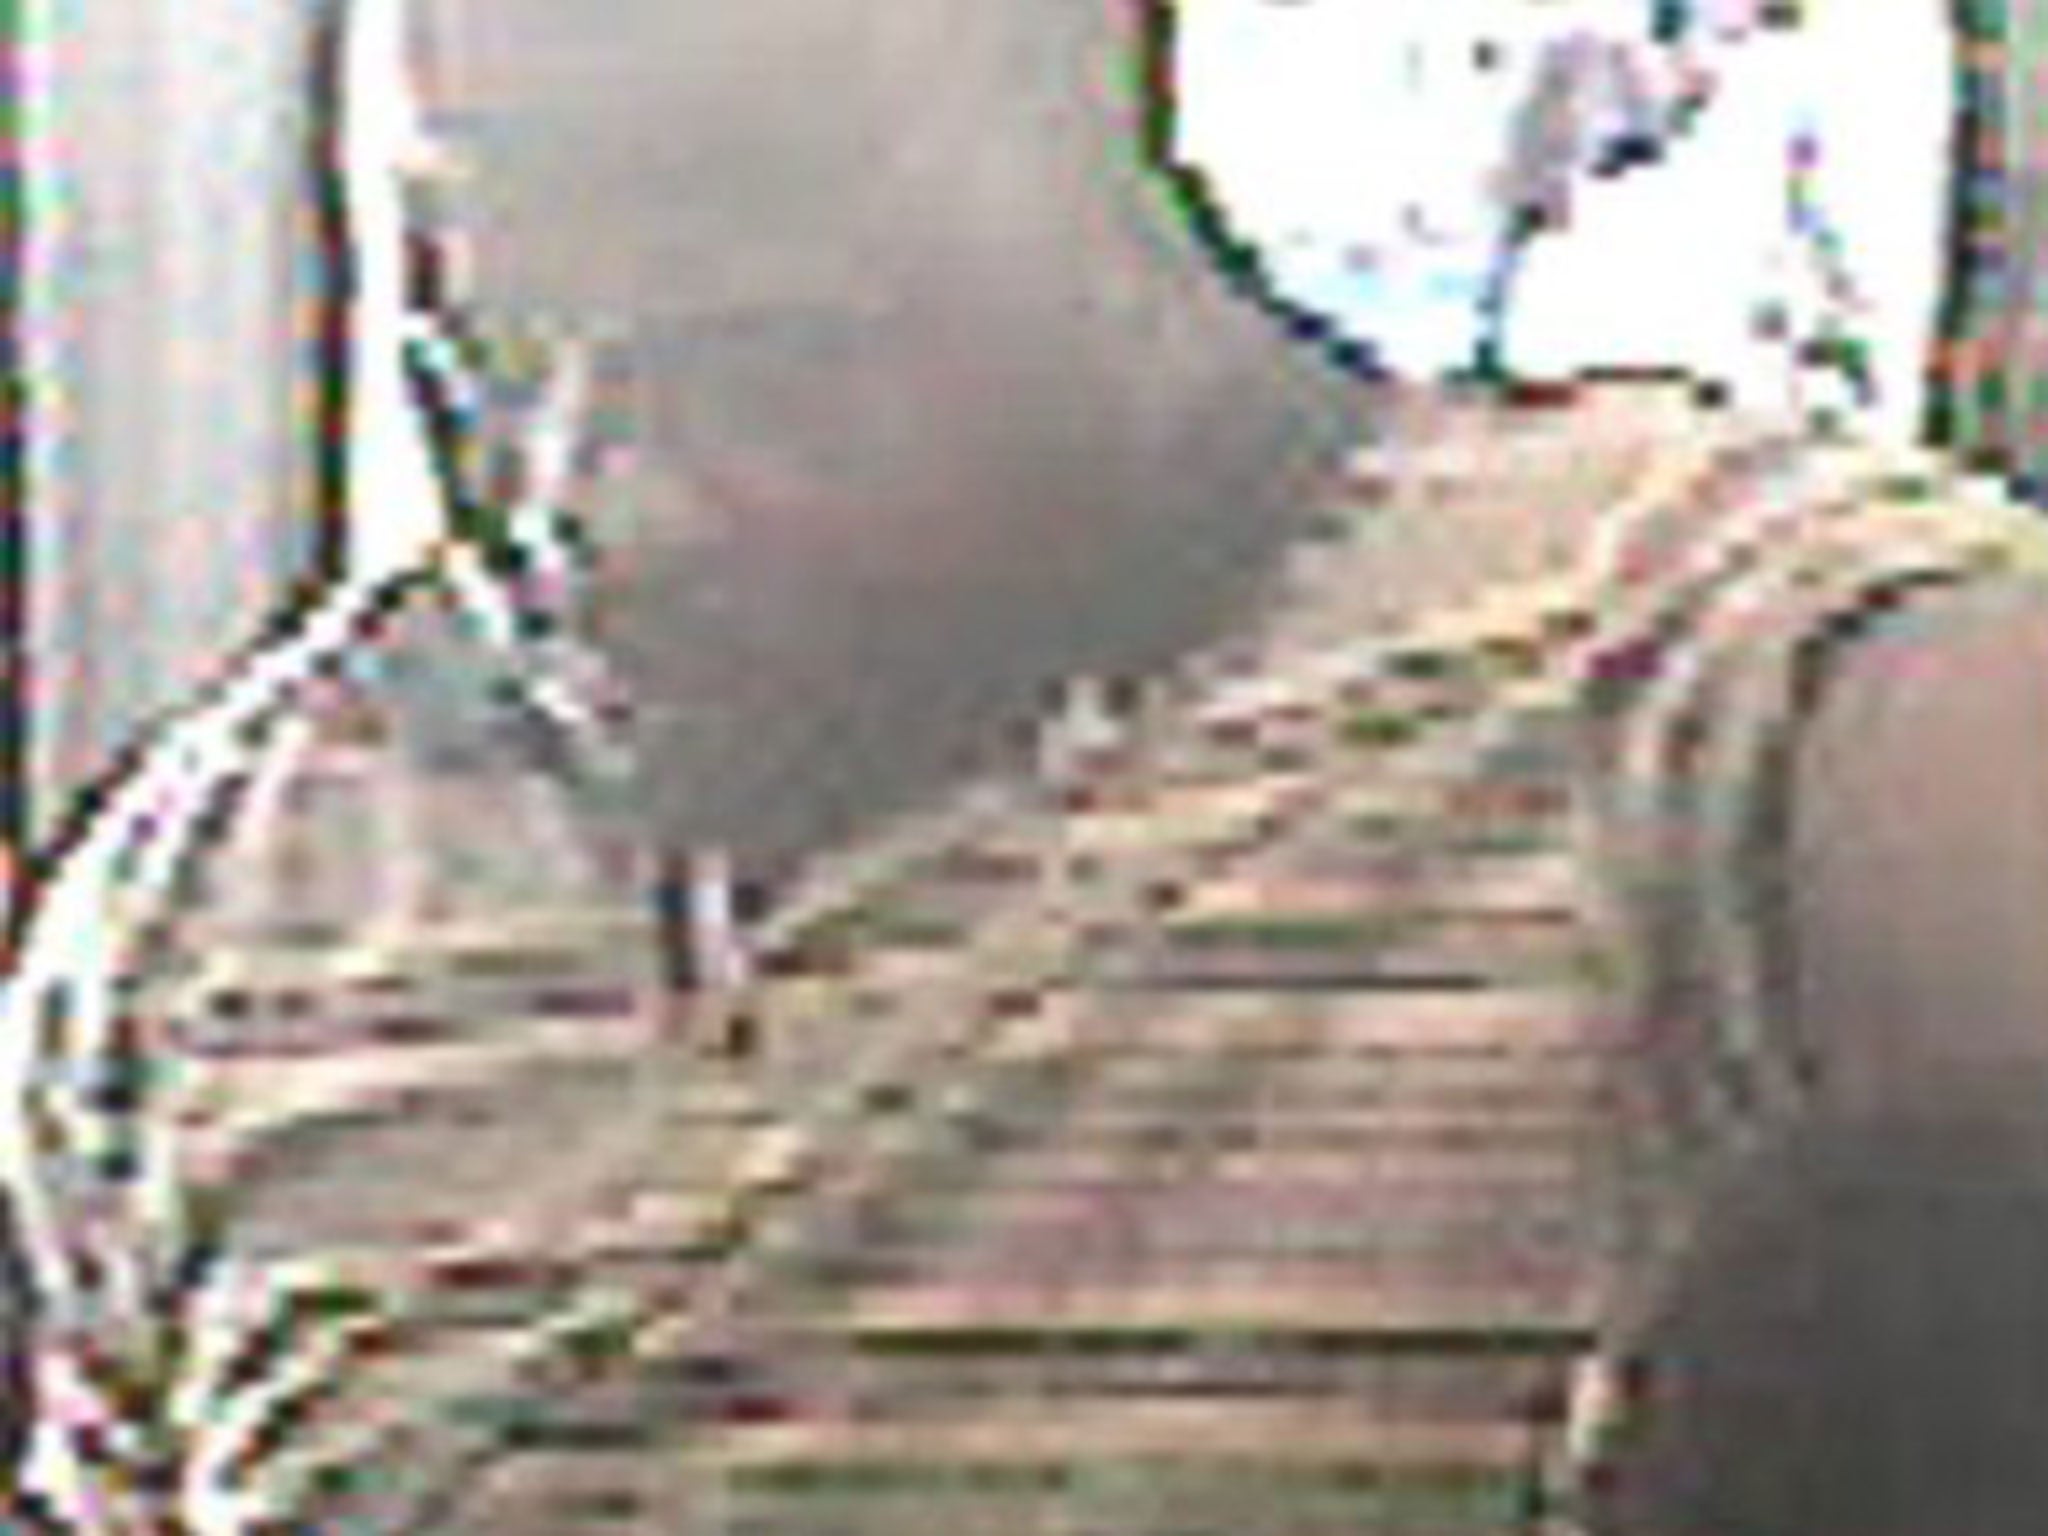 Police would like to speak to this man about a sexual assault on the 343 bus on 30 June